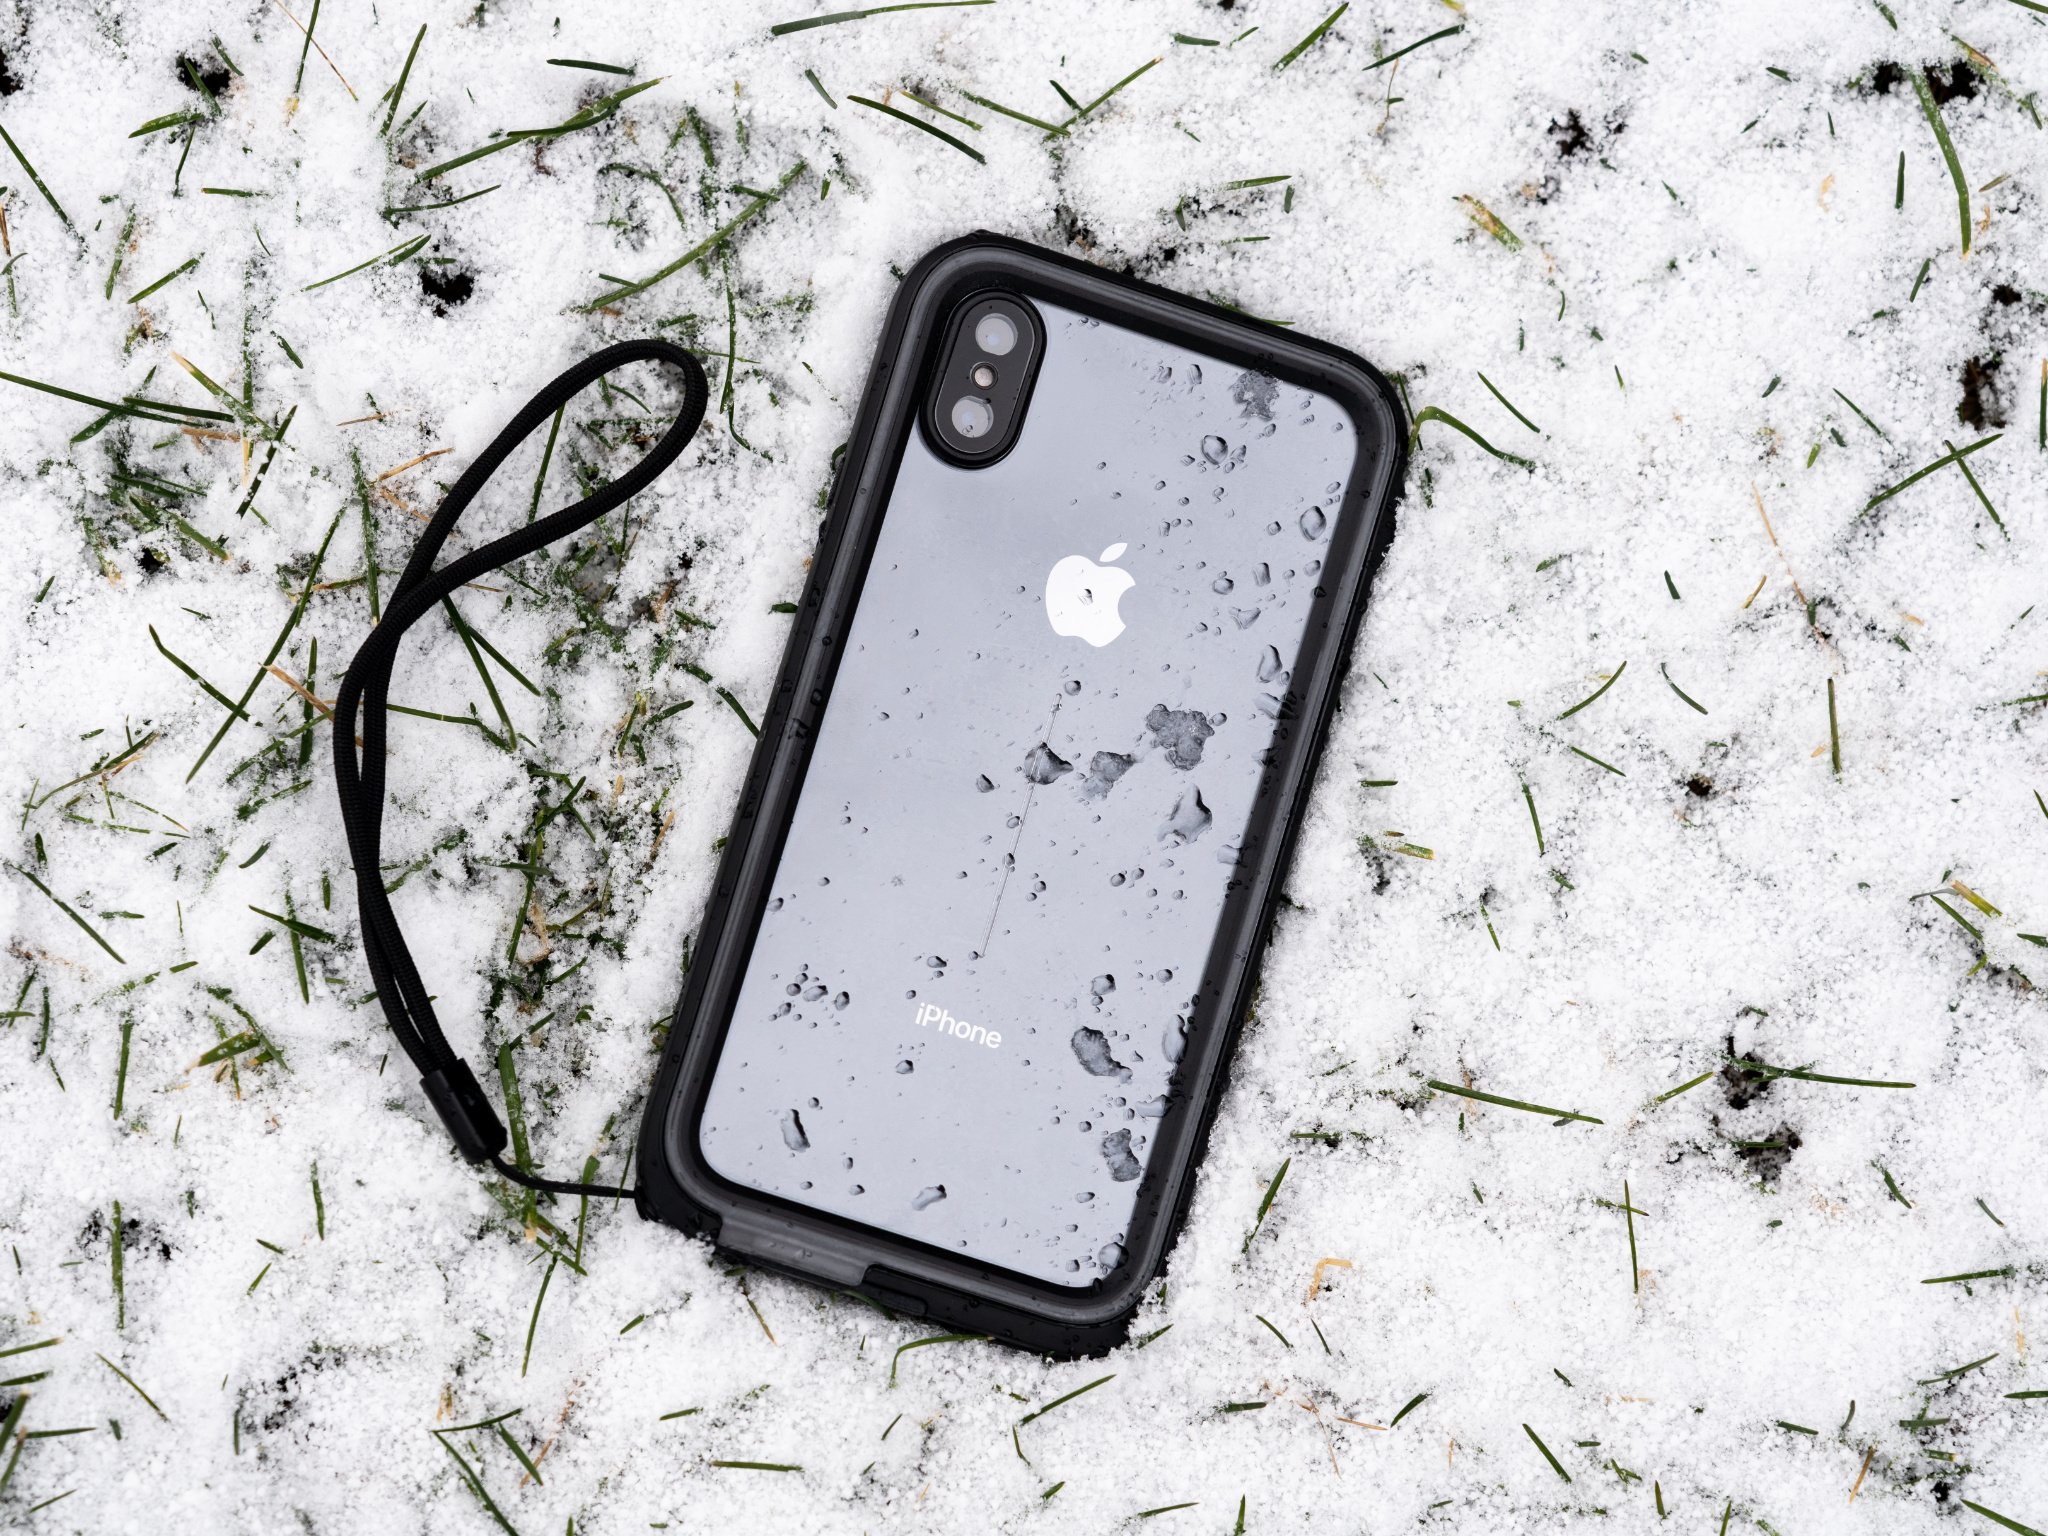 Catalyst Waterproof Case for iPhone review: Solid protection without bulk